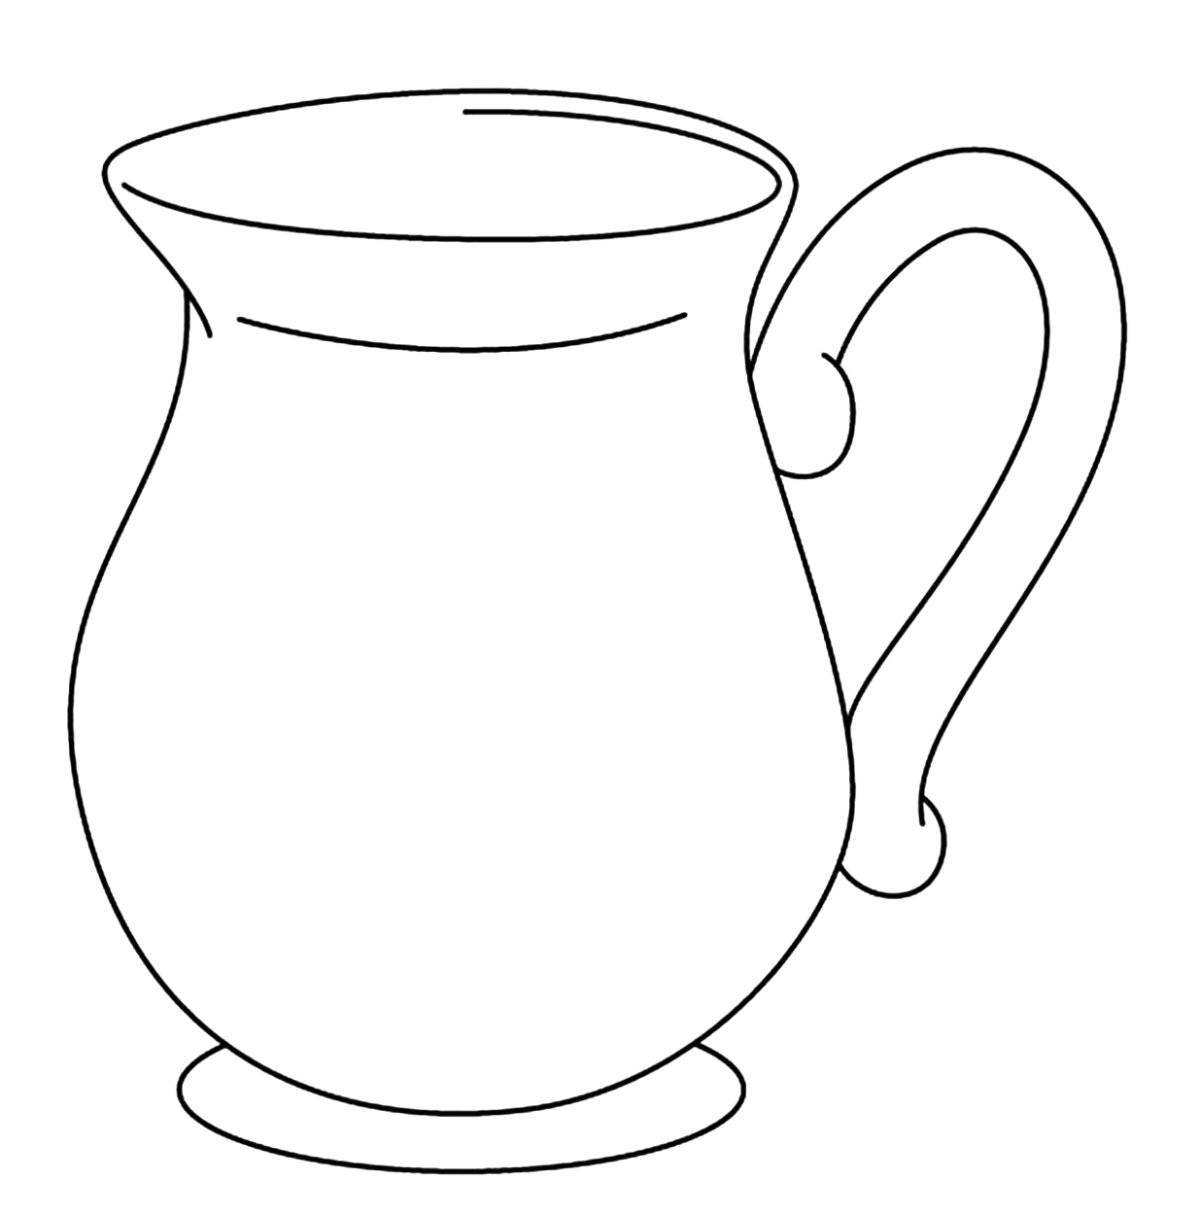 Decorated jug coloring page